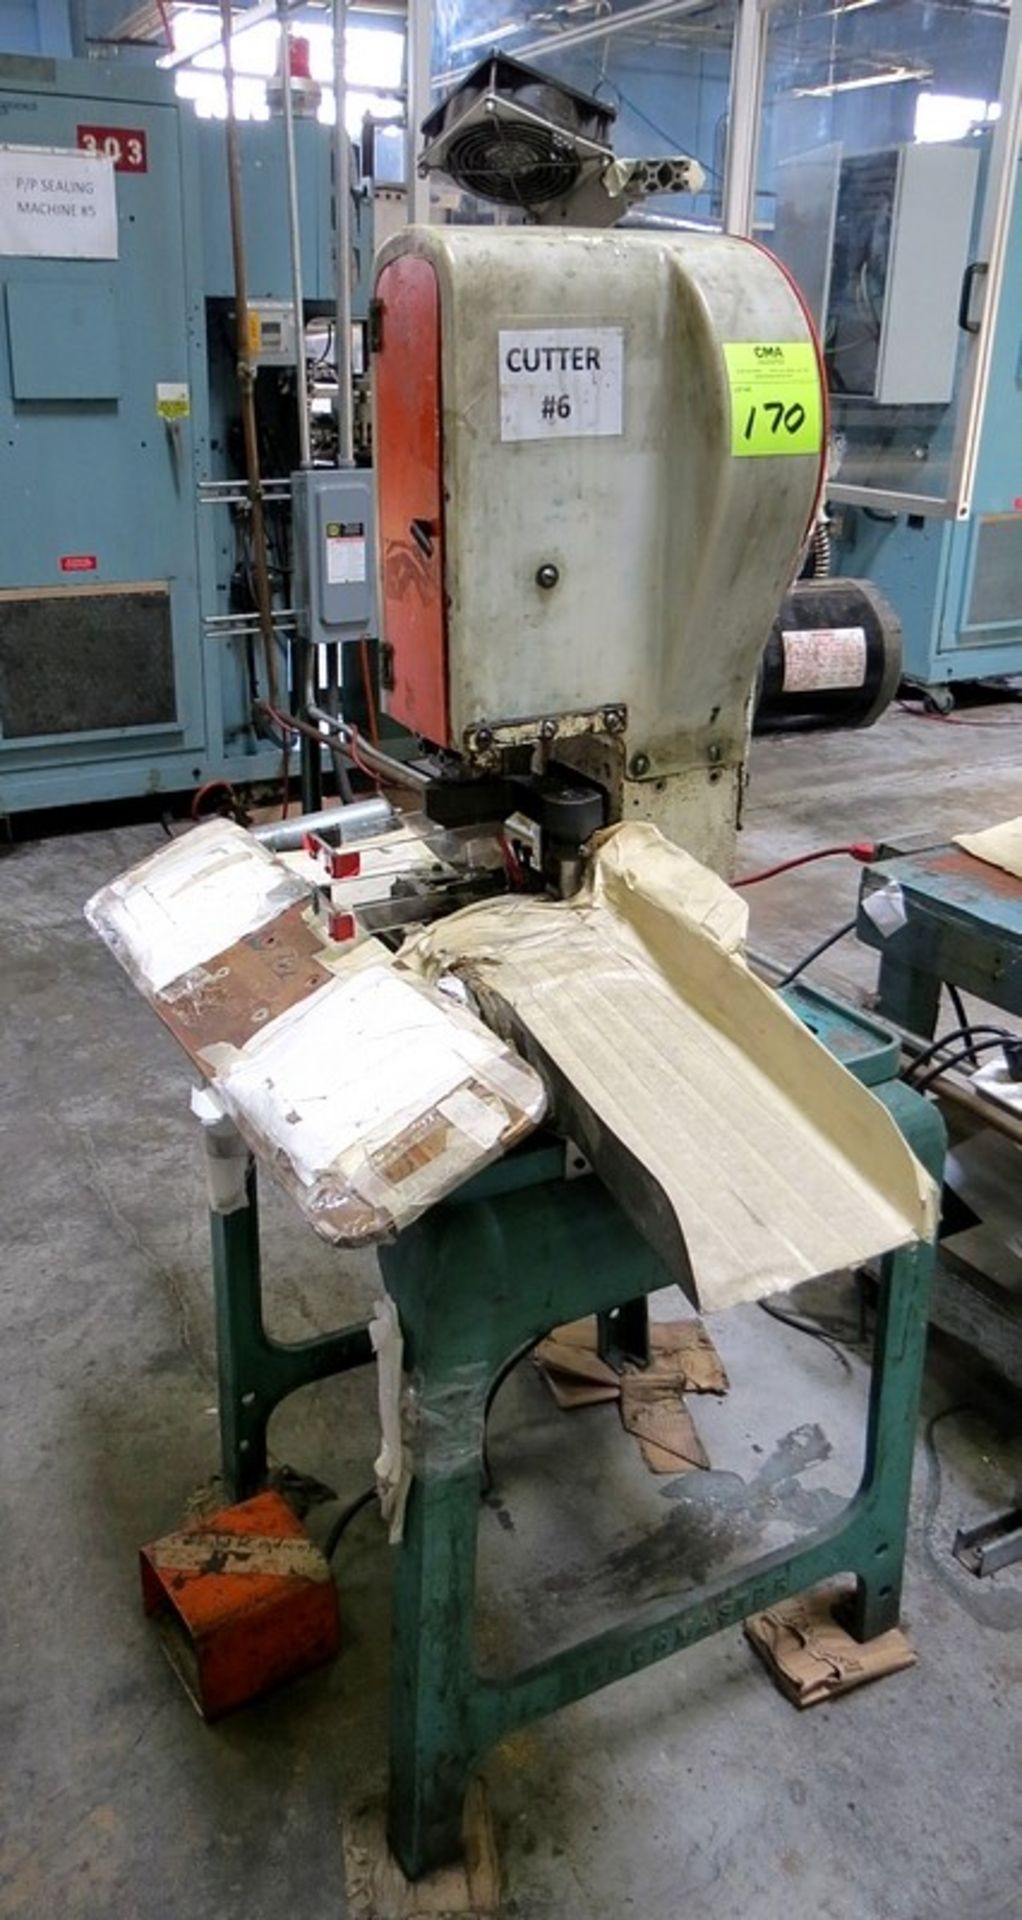 ELECTRIC CUTTING PRESSES, 0.5 HP AC MOTOR, MANUAL FEED, FOOT OPERATED, METAL TABLE STAND, NO.6